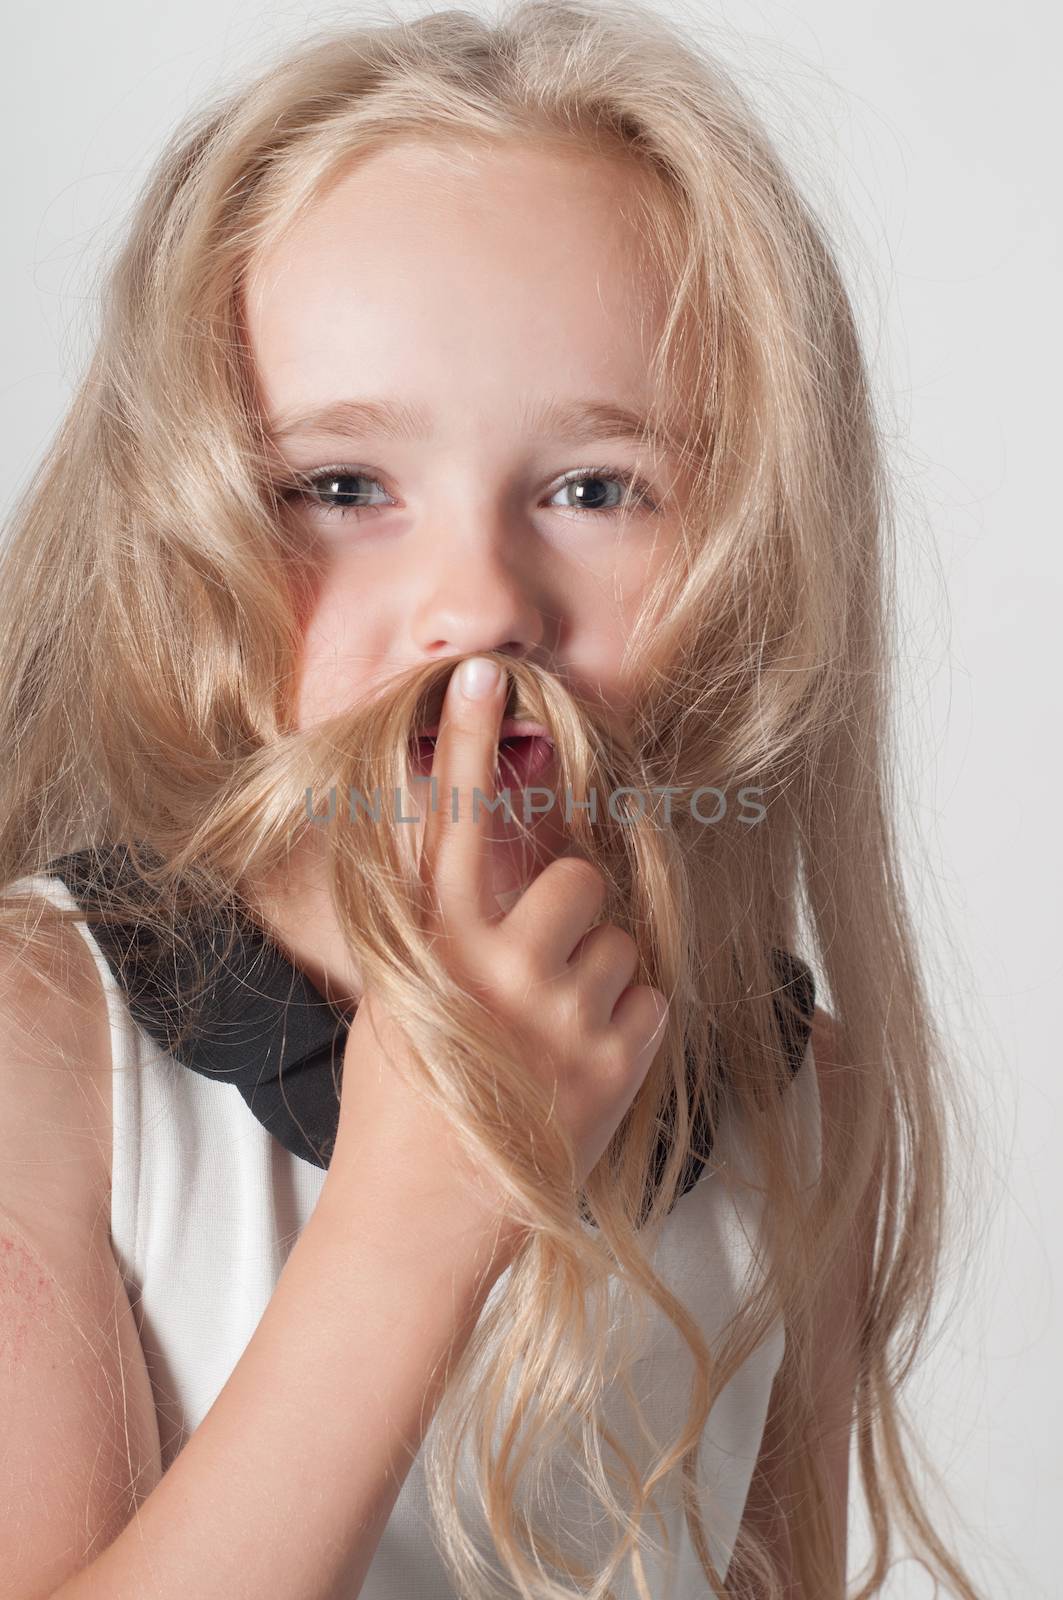 Little girl with long hair fooling around by anytka